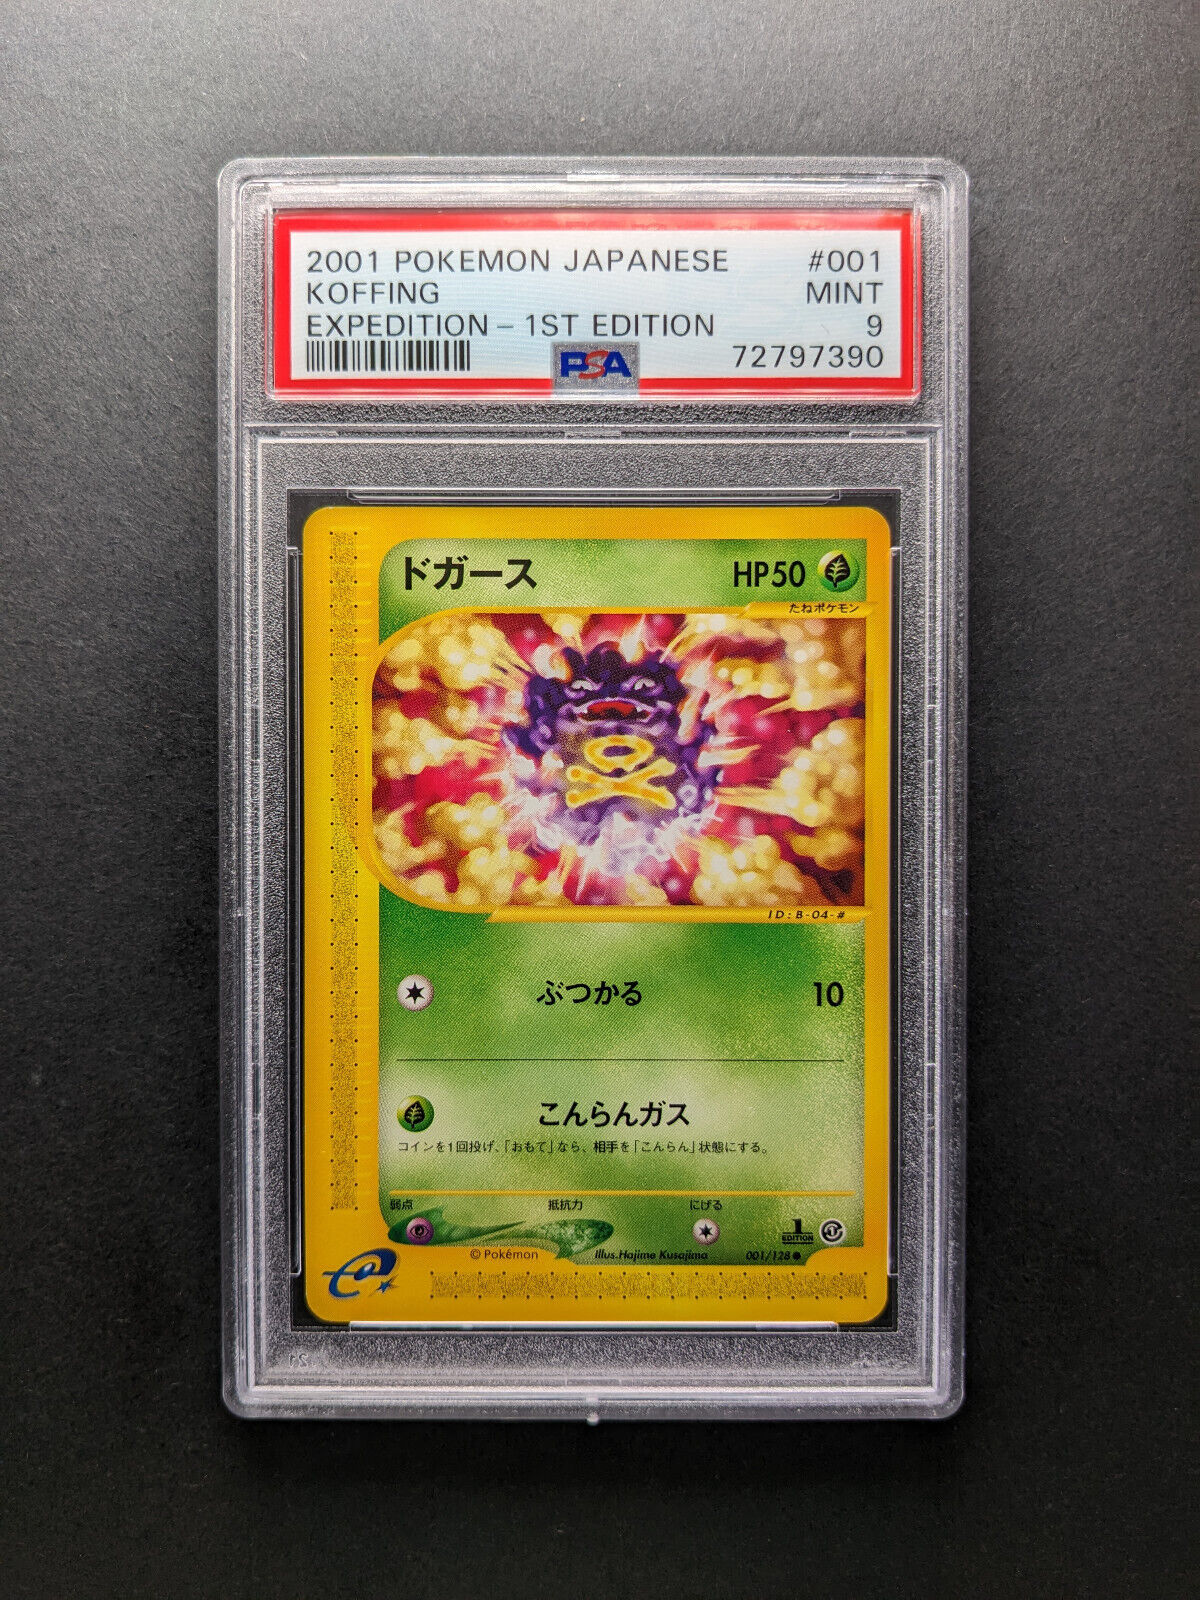 2001 Pokemon KOFFING - 001/128 - 1st Edition - Japanese Expedition - PSA 9